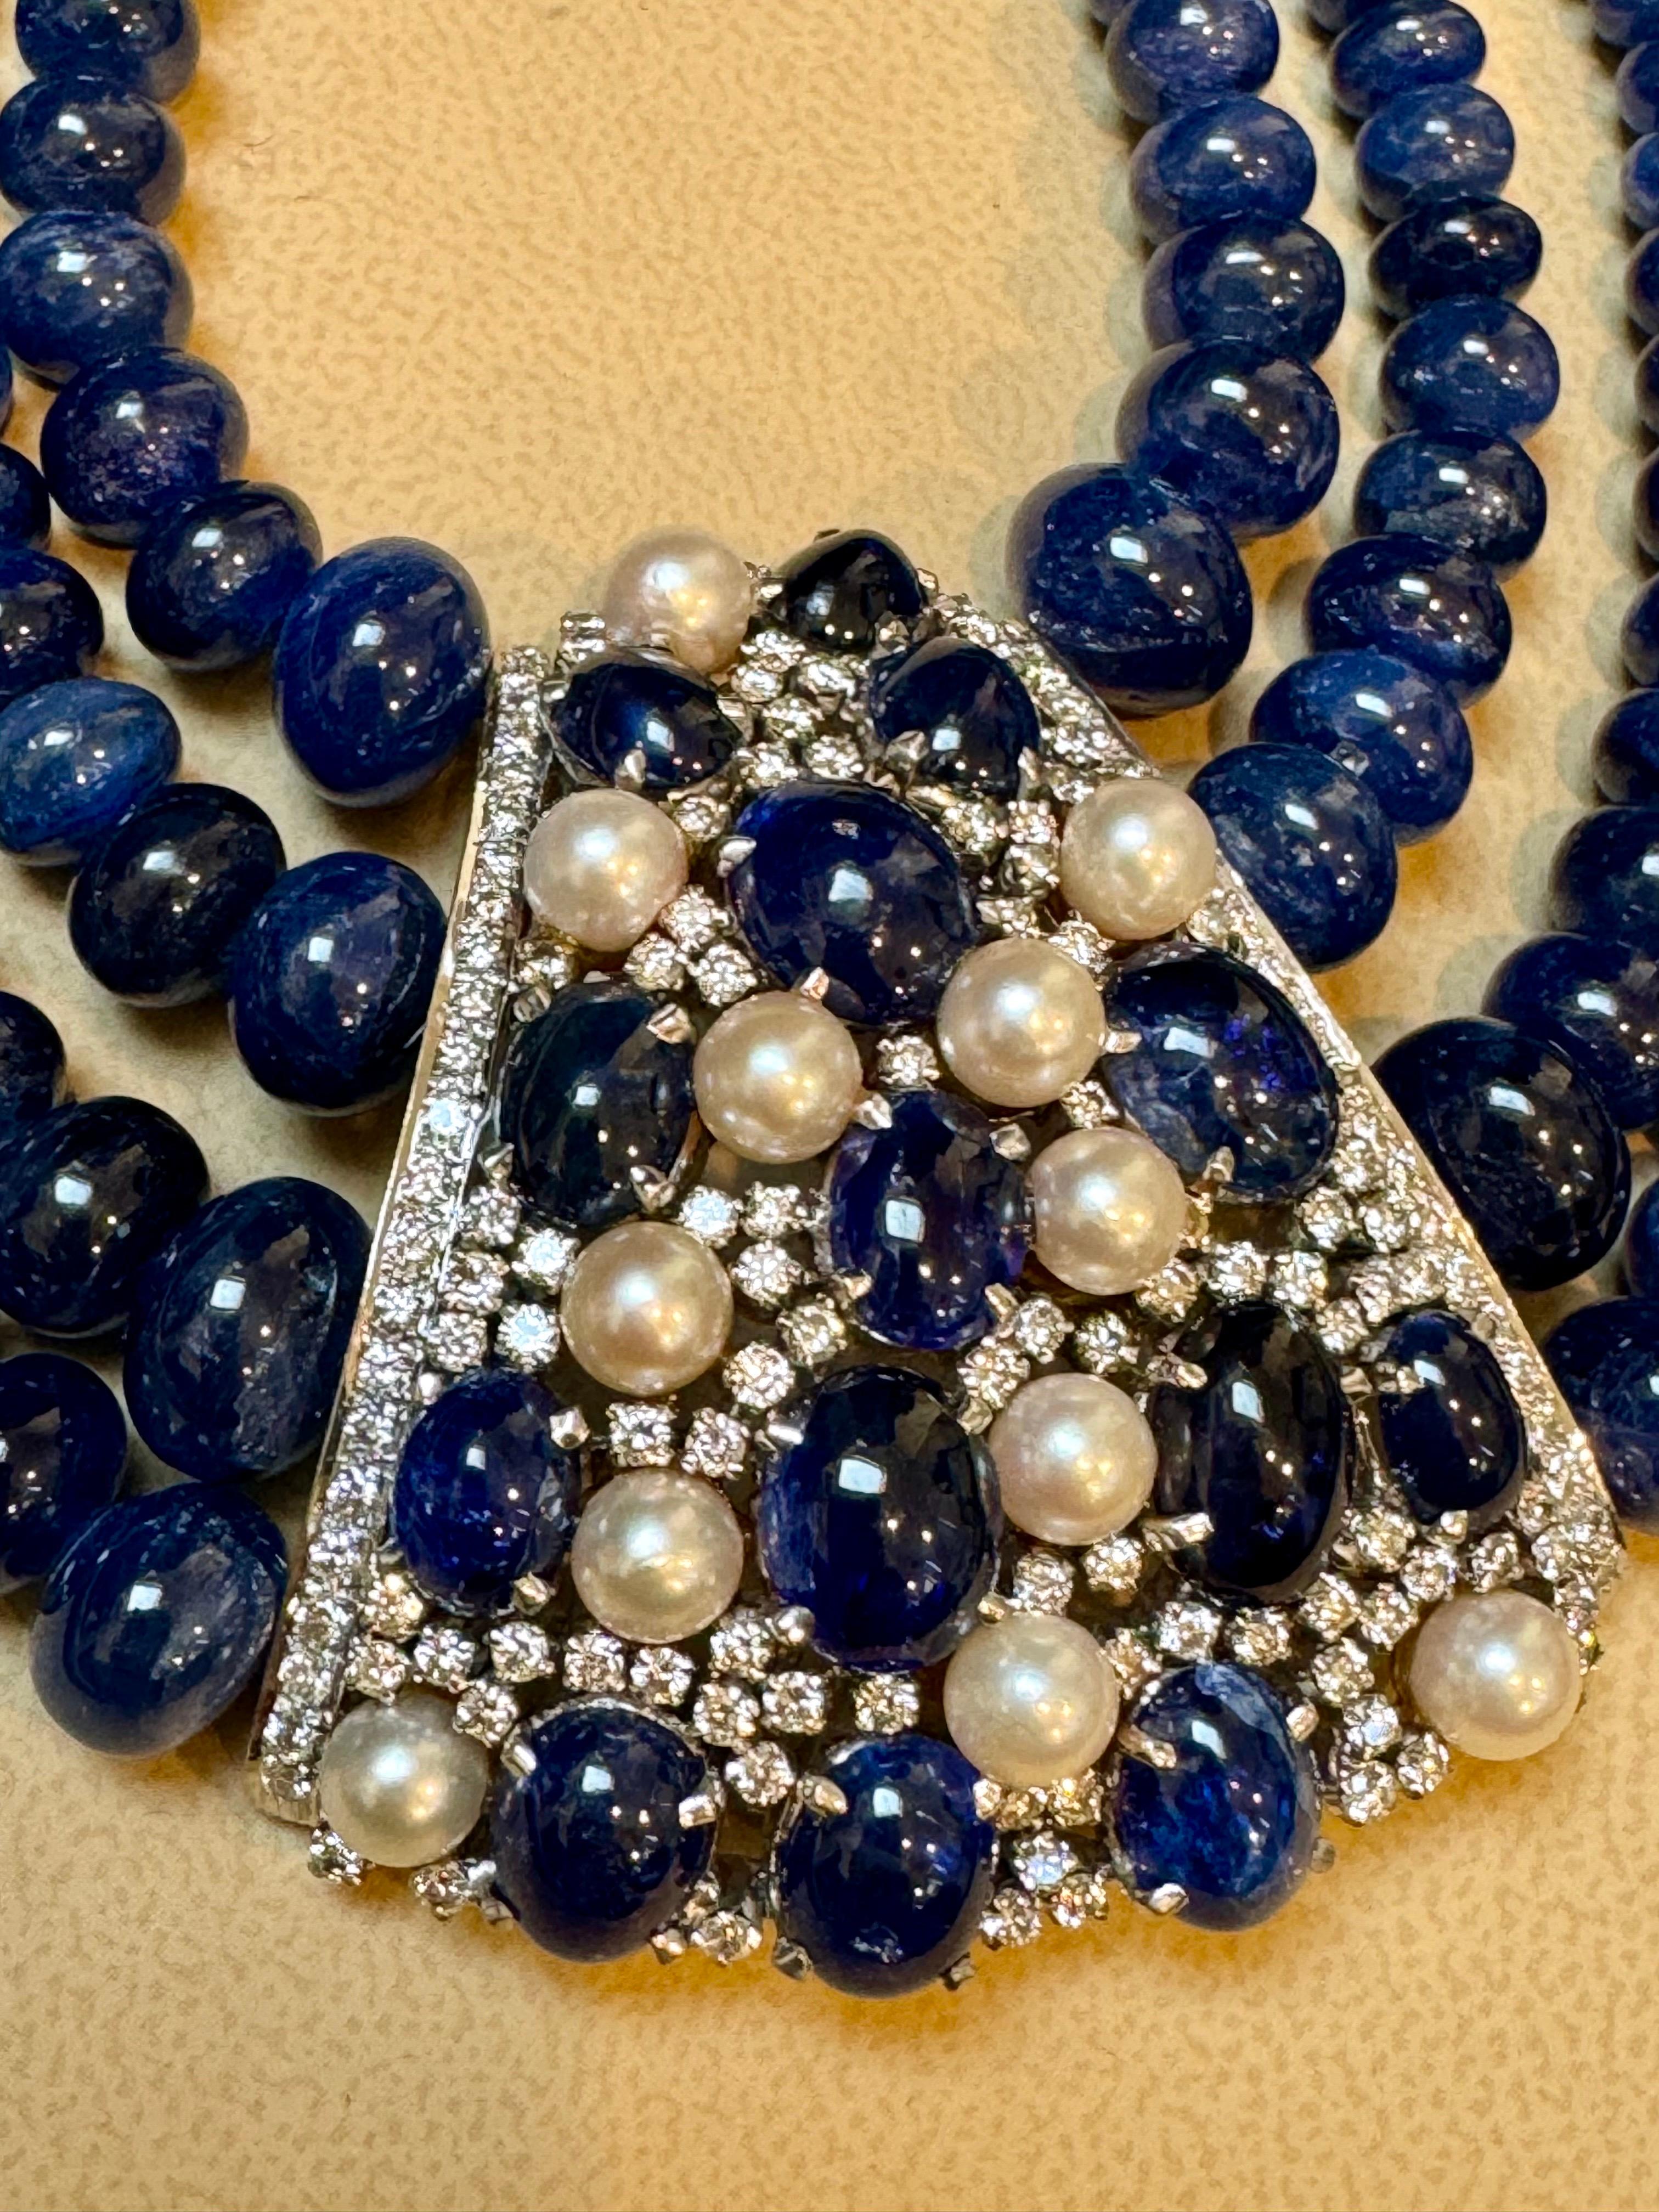 700Ct Sapphire Bead Necklace with cabochon & Diamond Center & Diamond Spacer 18K For Sale 4